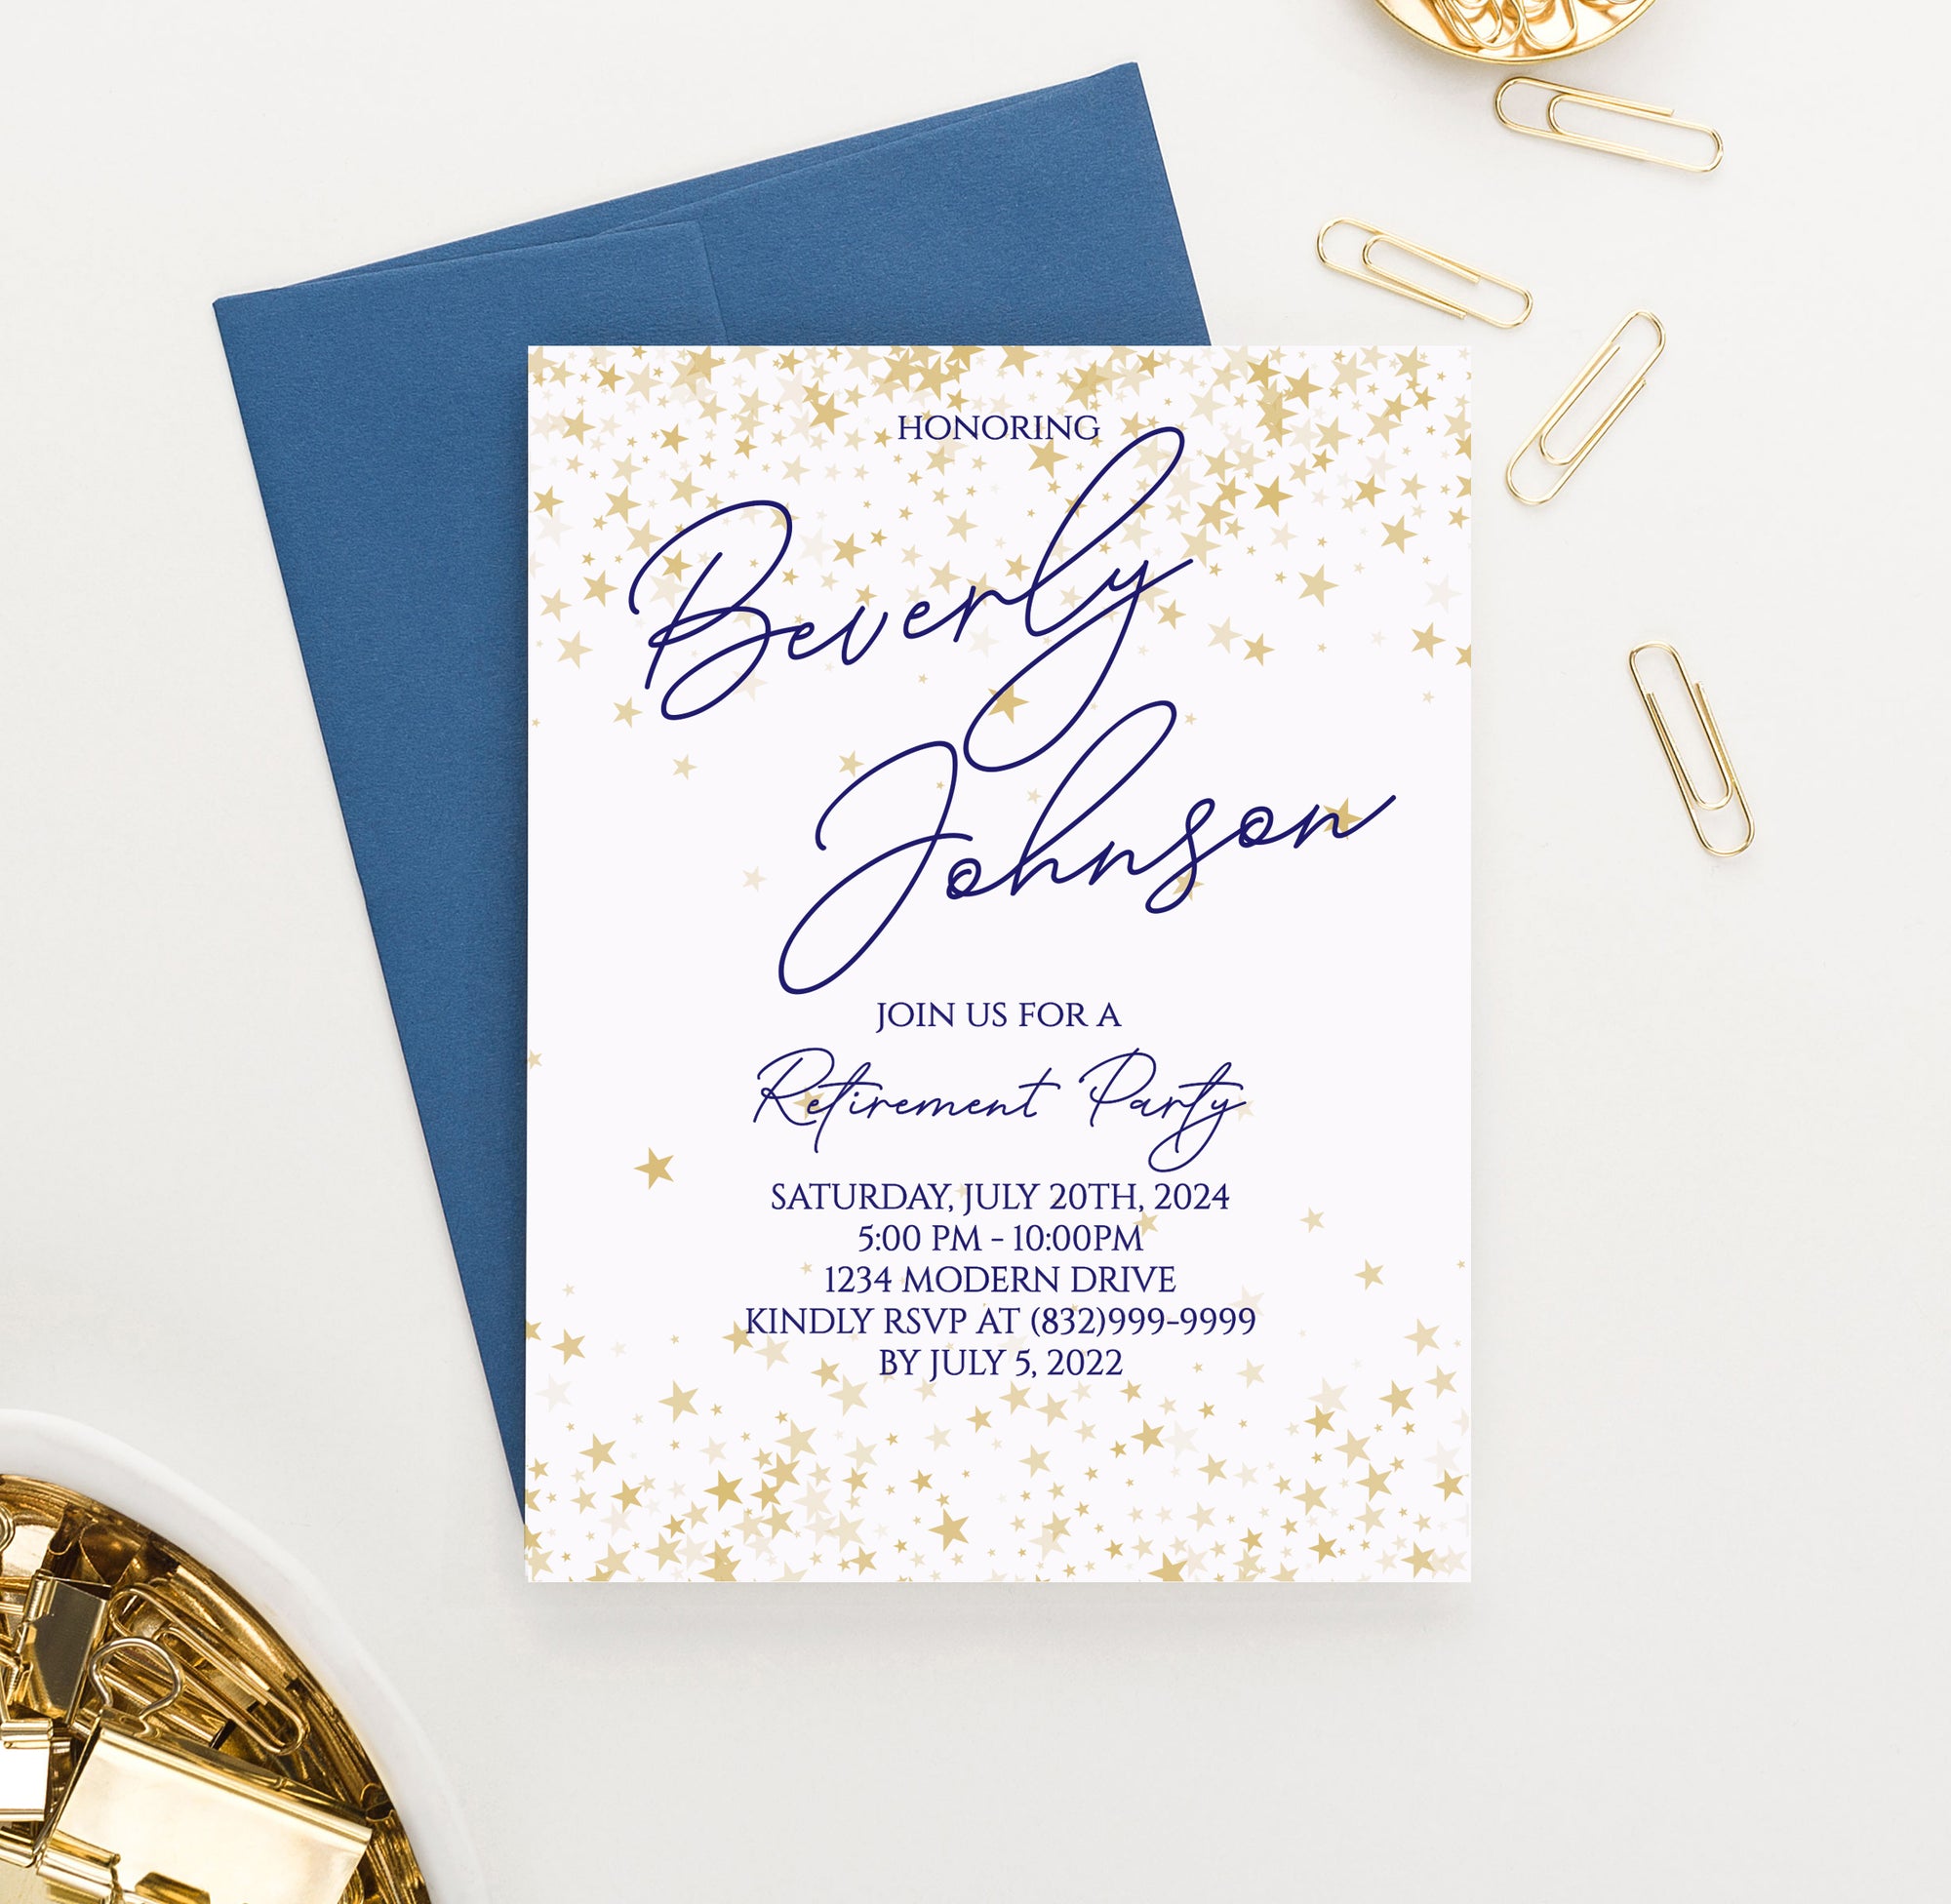 Personalized Retirement Party Invitations With Gold Stars